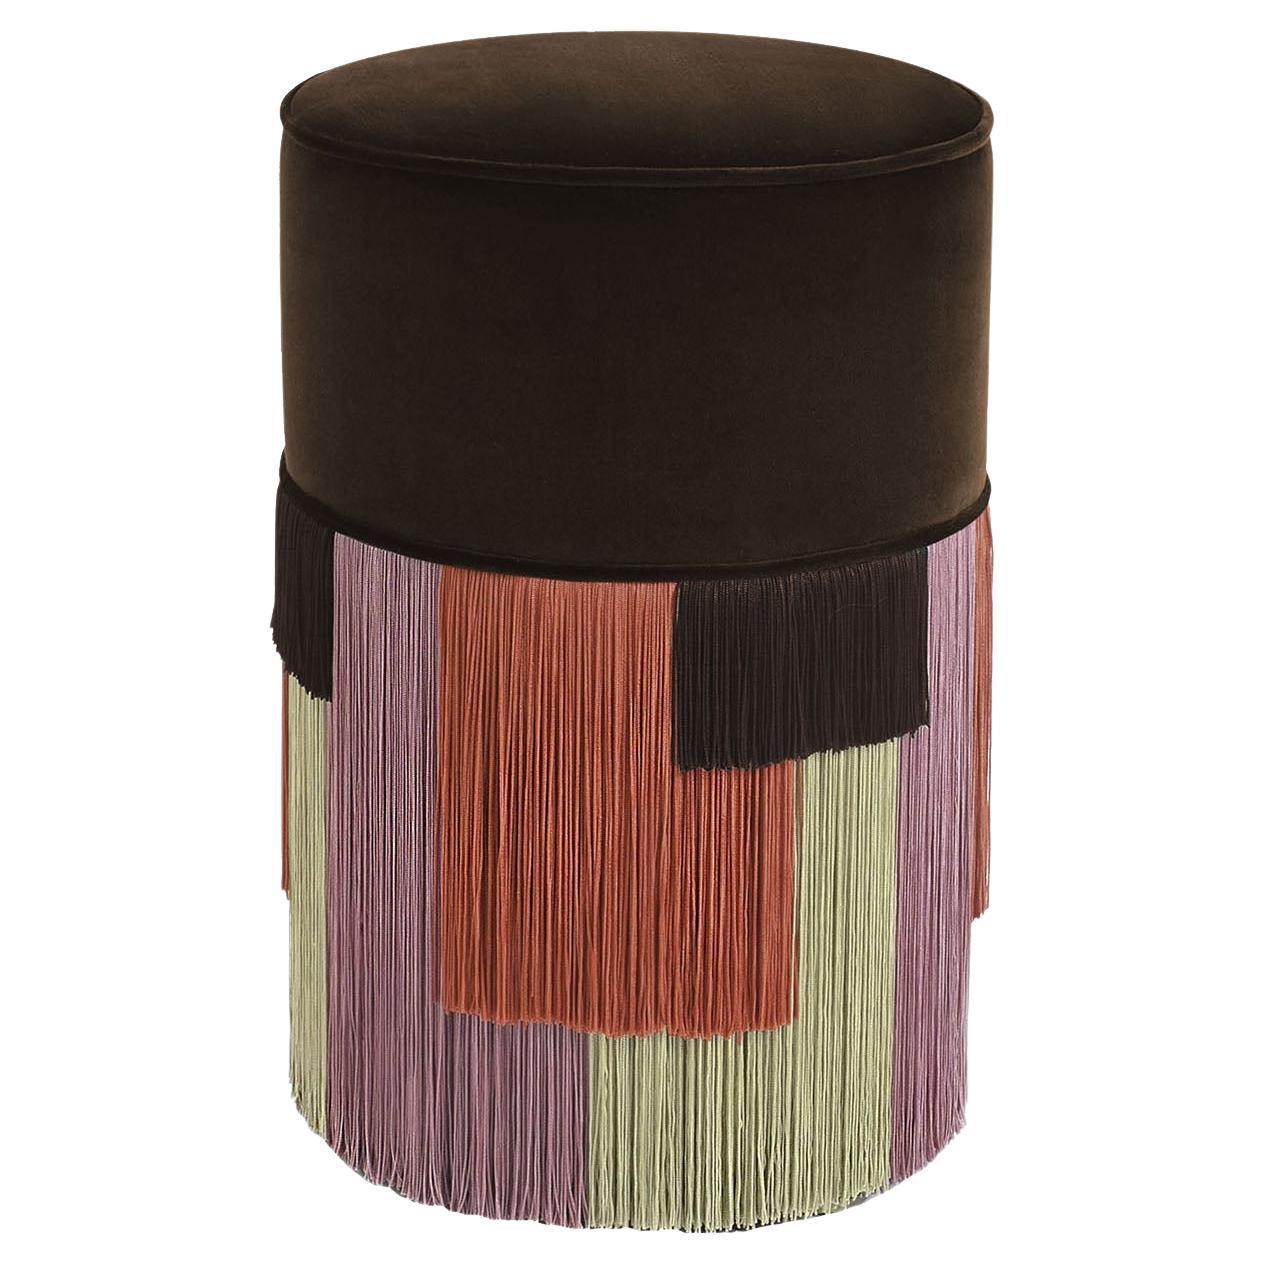 Couture Brown Pouf with Geometric Fringe by Lorenza Bozzoli Design For Sale